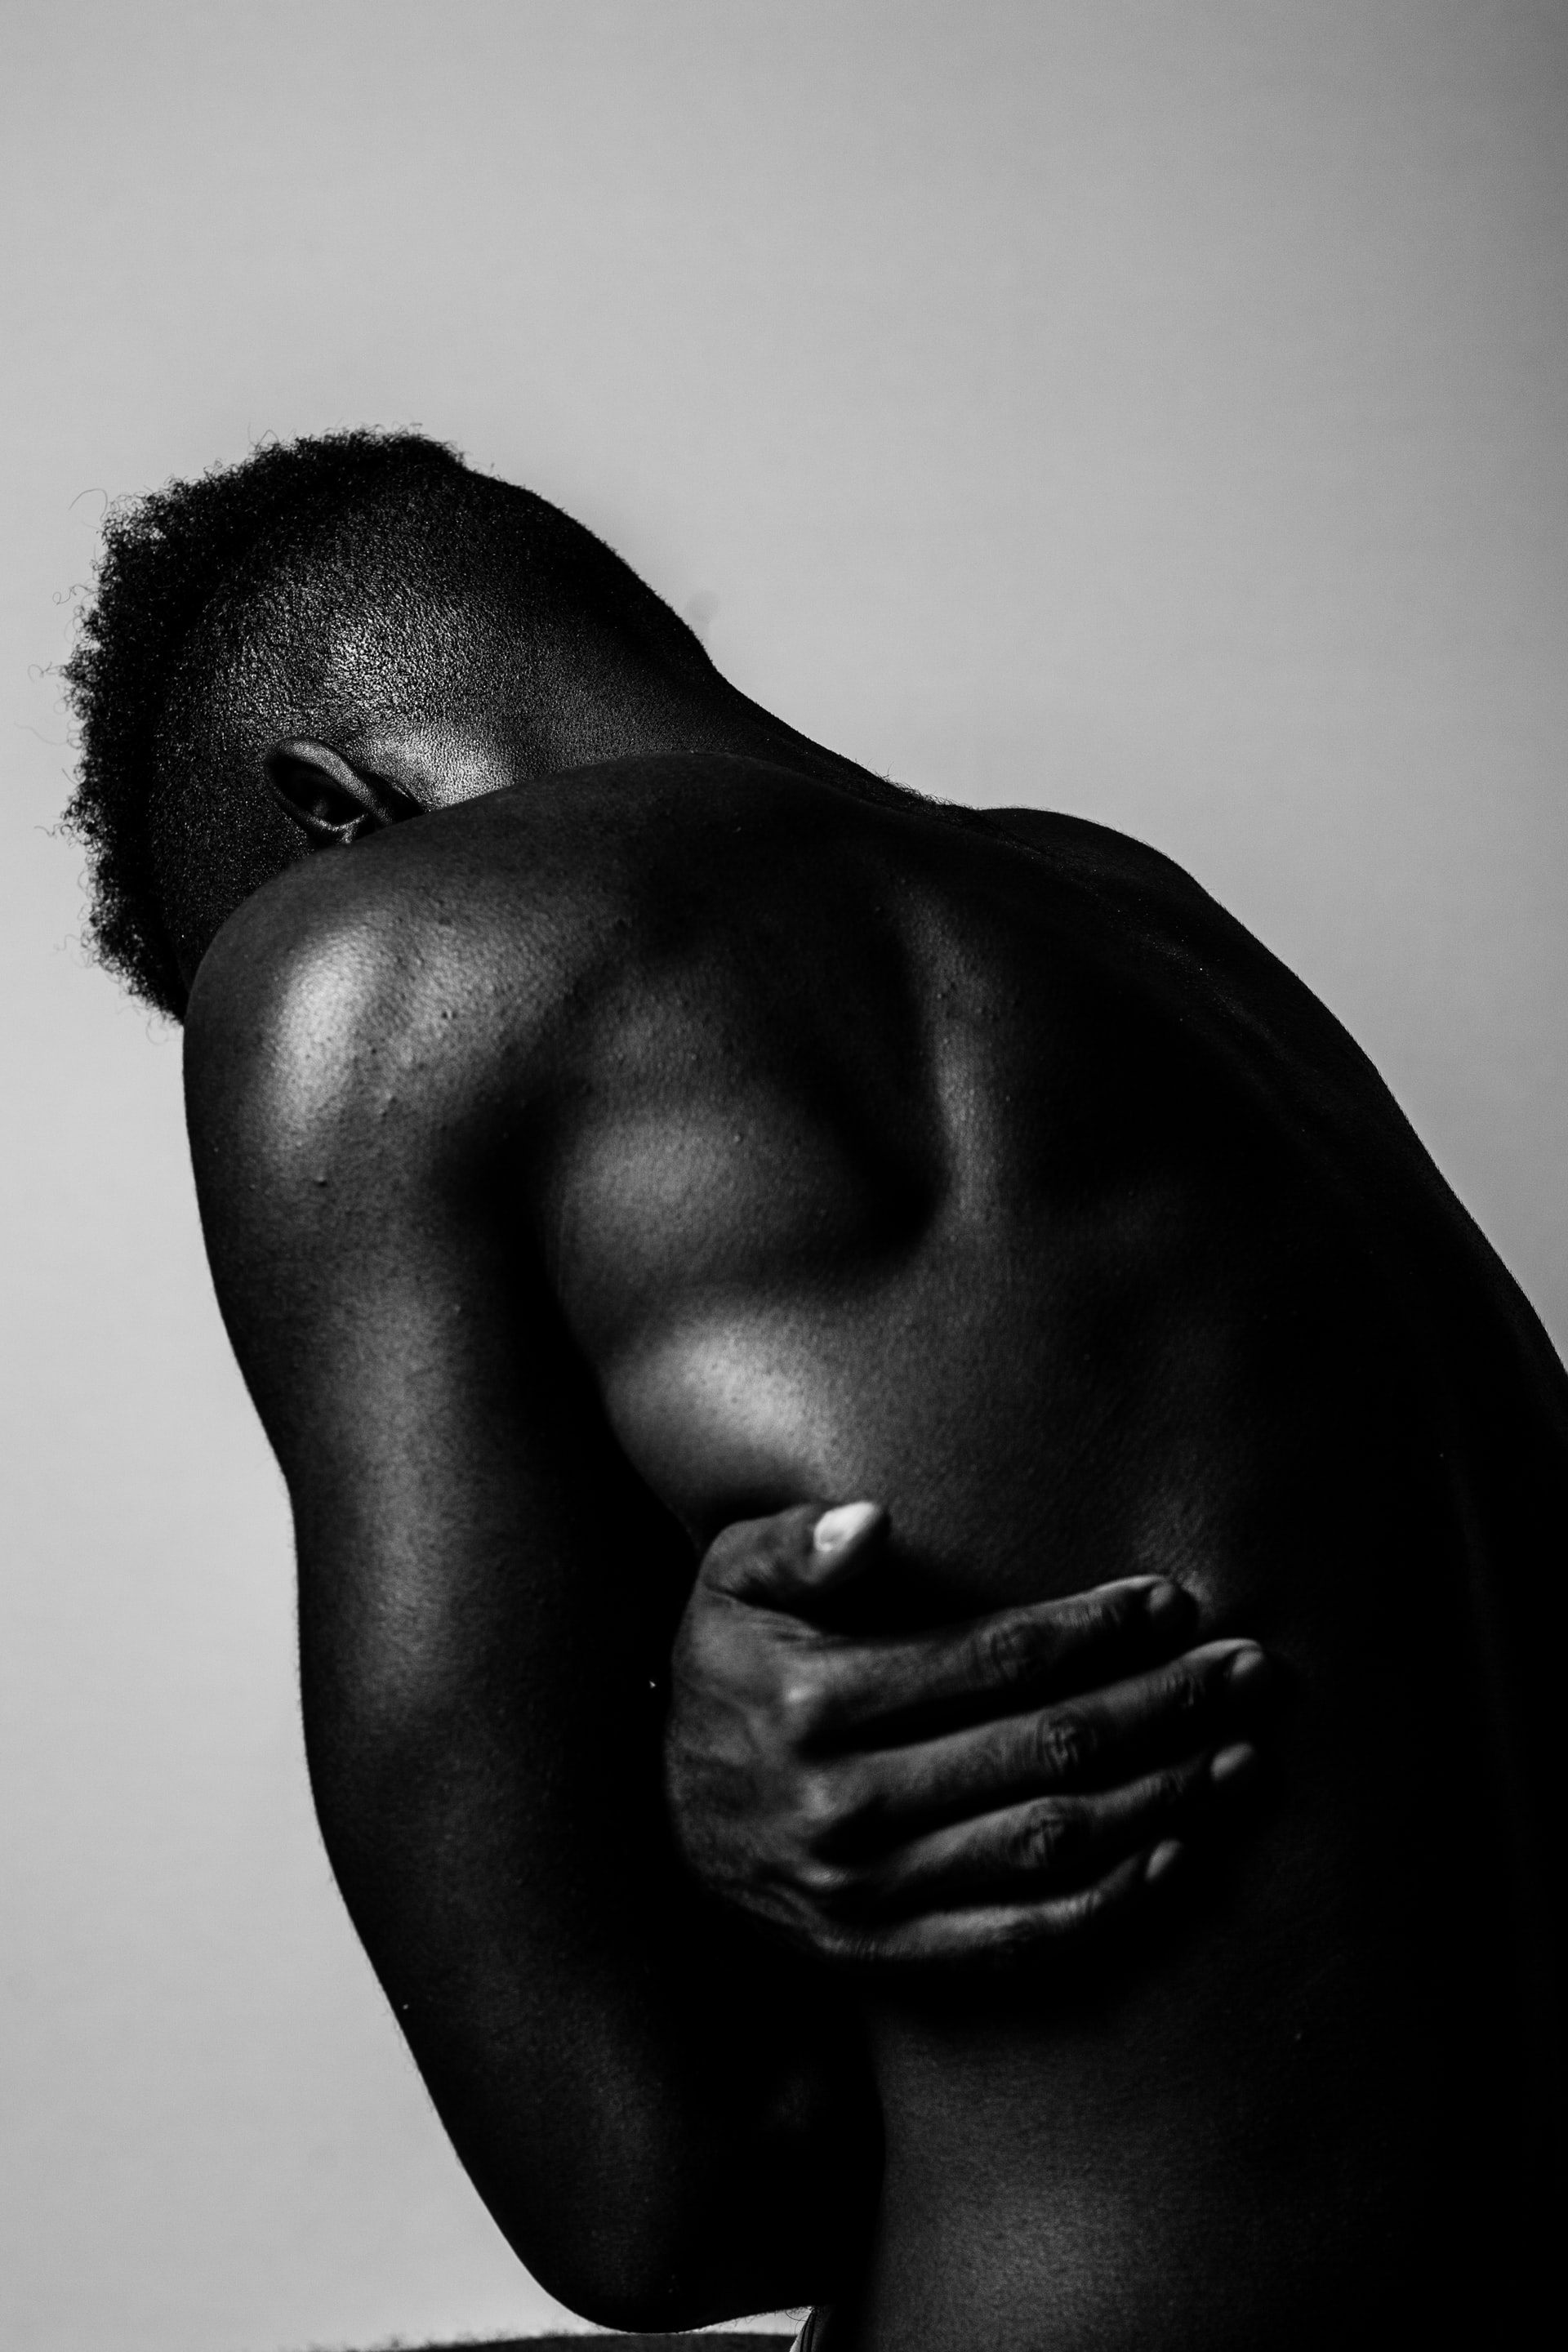 A naked blackman has his hand on his right side abdomen with pain